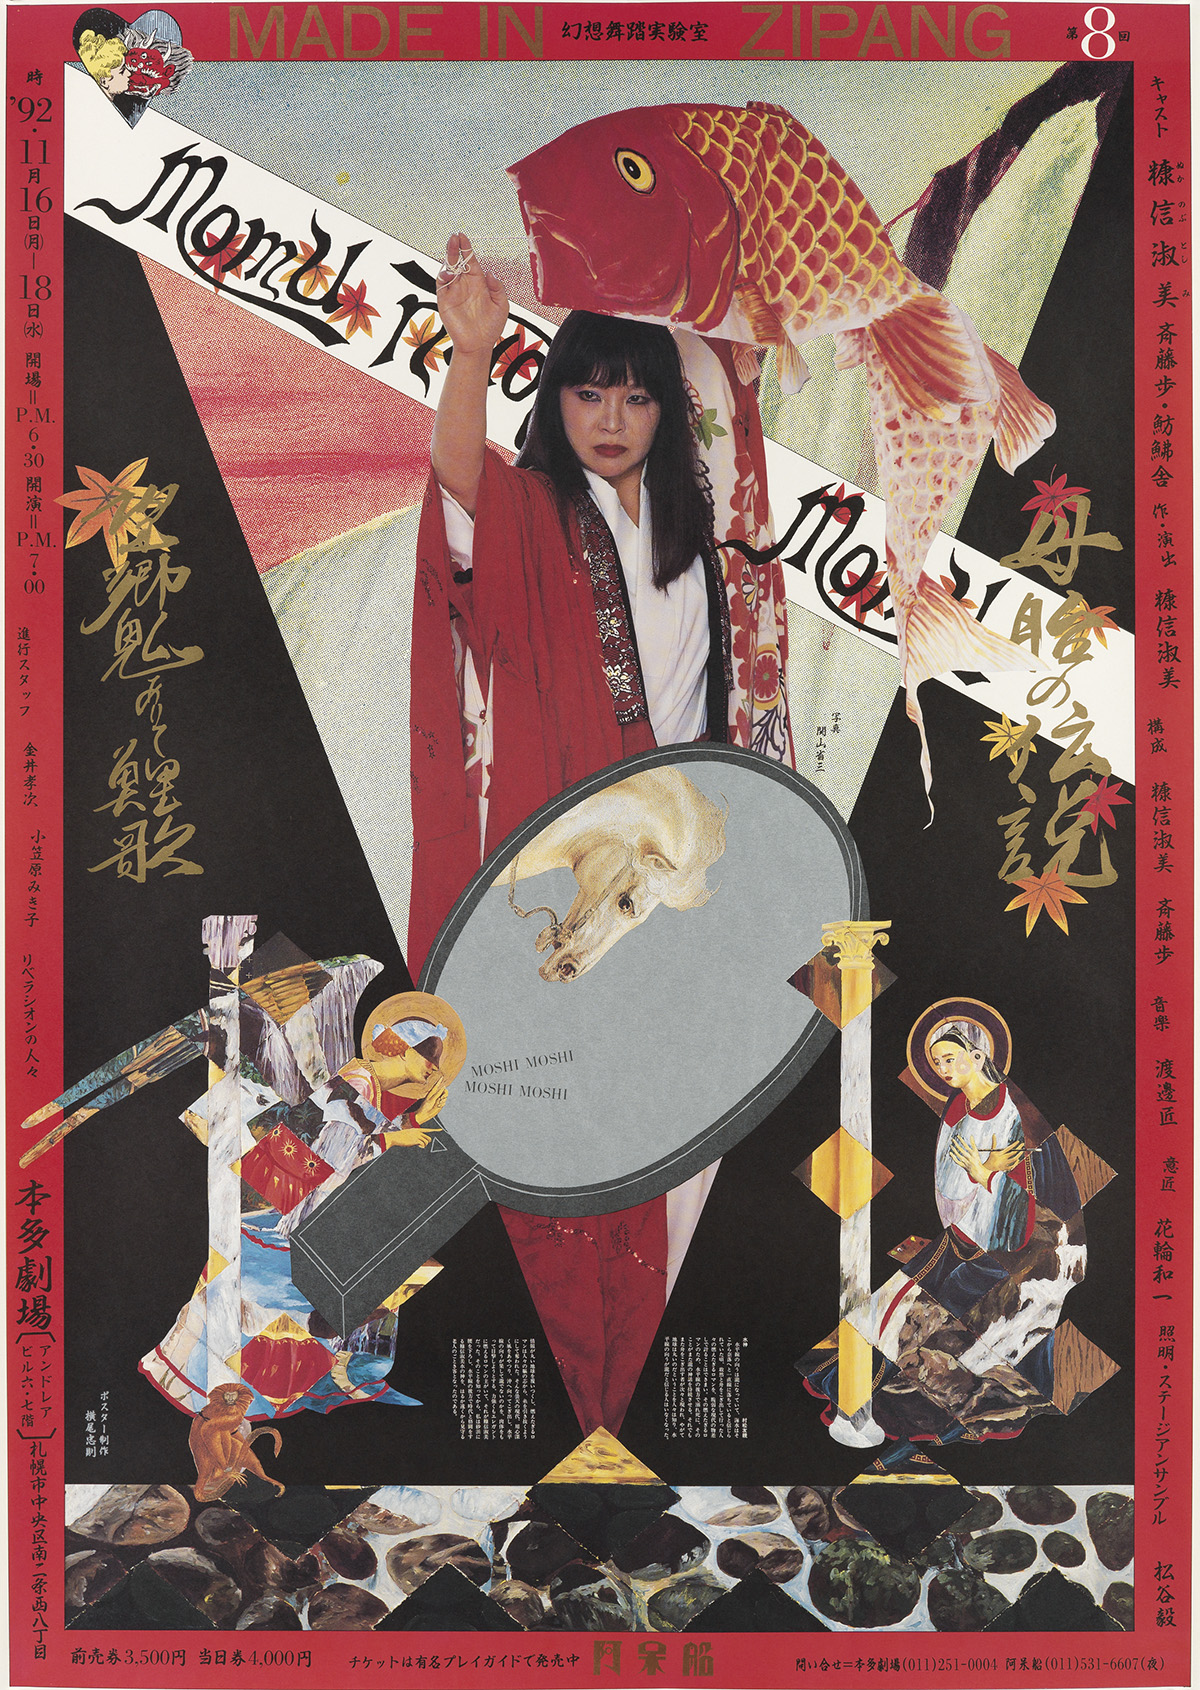 TADANORI YOKOO (1936- ). [LEGEND OF THE MOTHERS WOMB] / MADE IN ZIPANG. 1992. 40x28 inches, 103x72 cm.